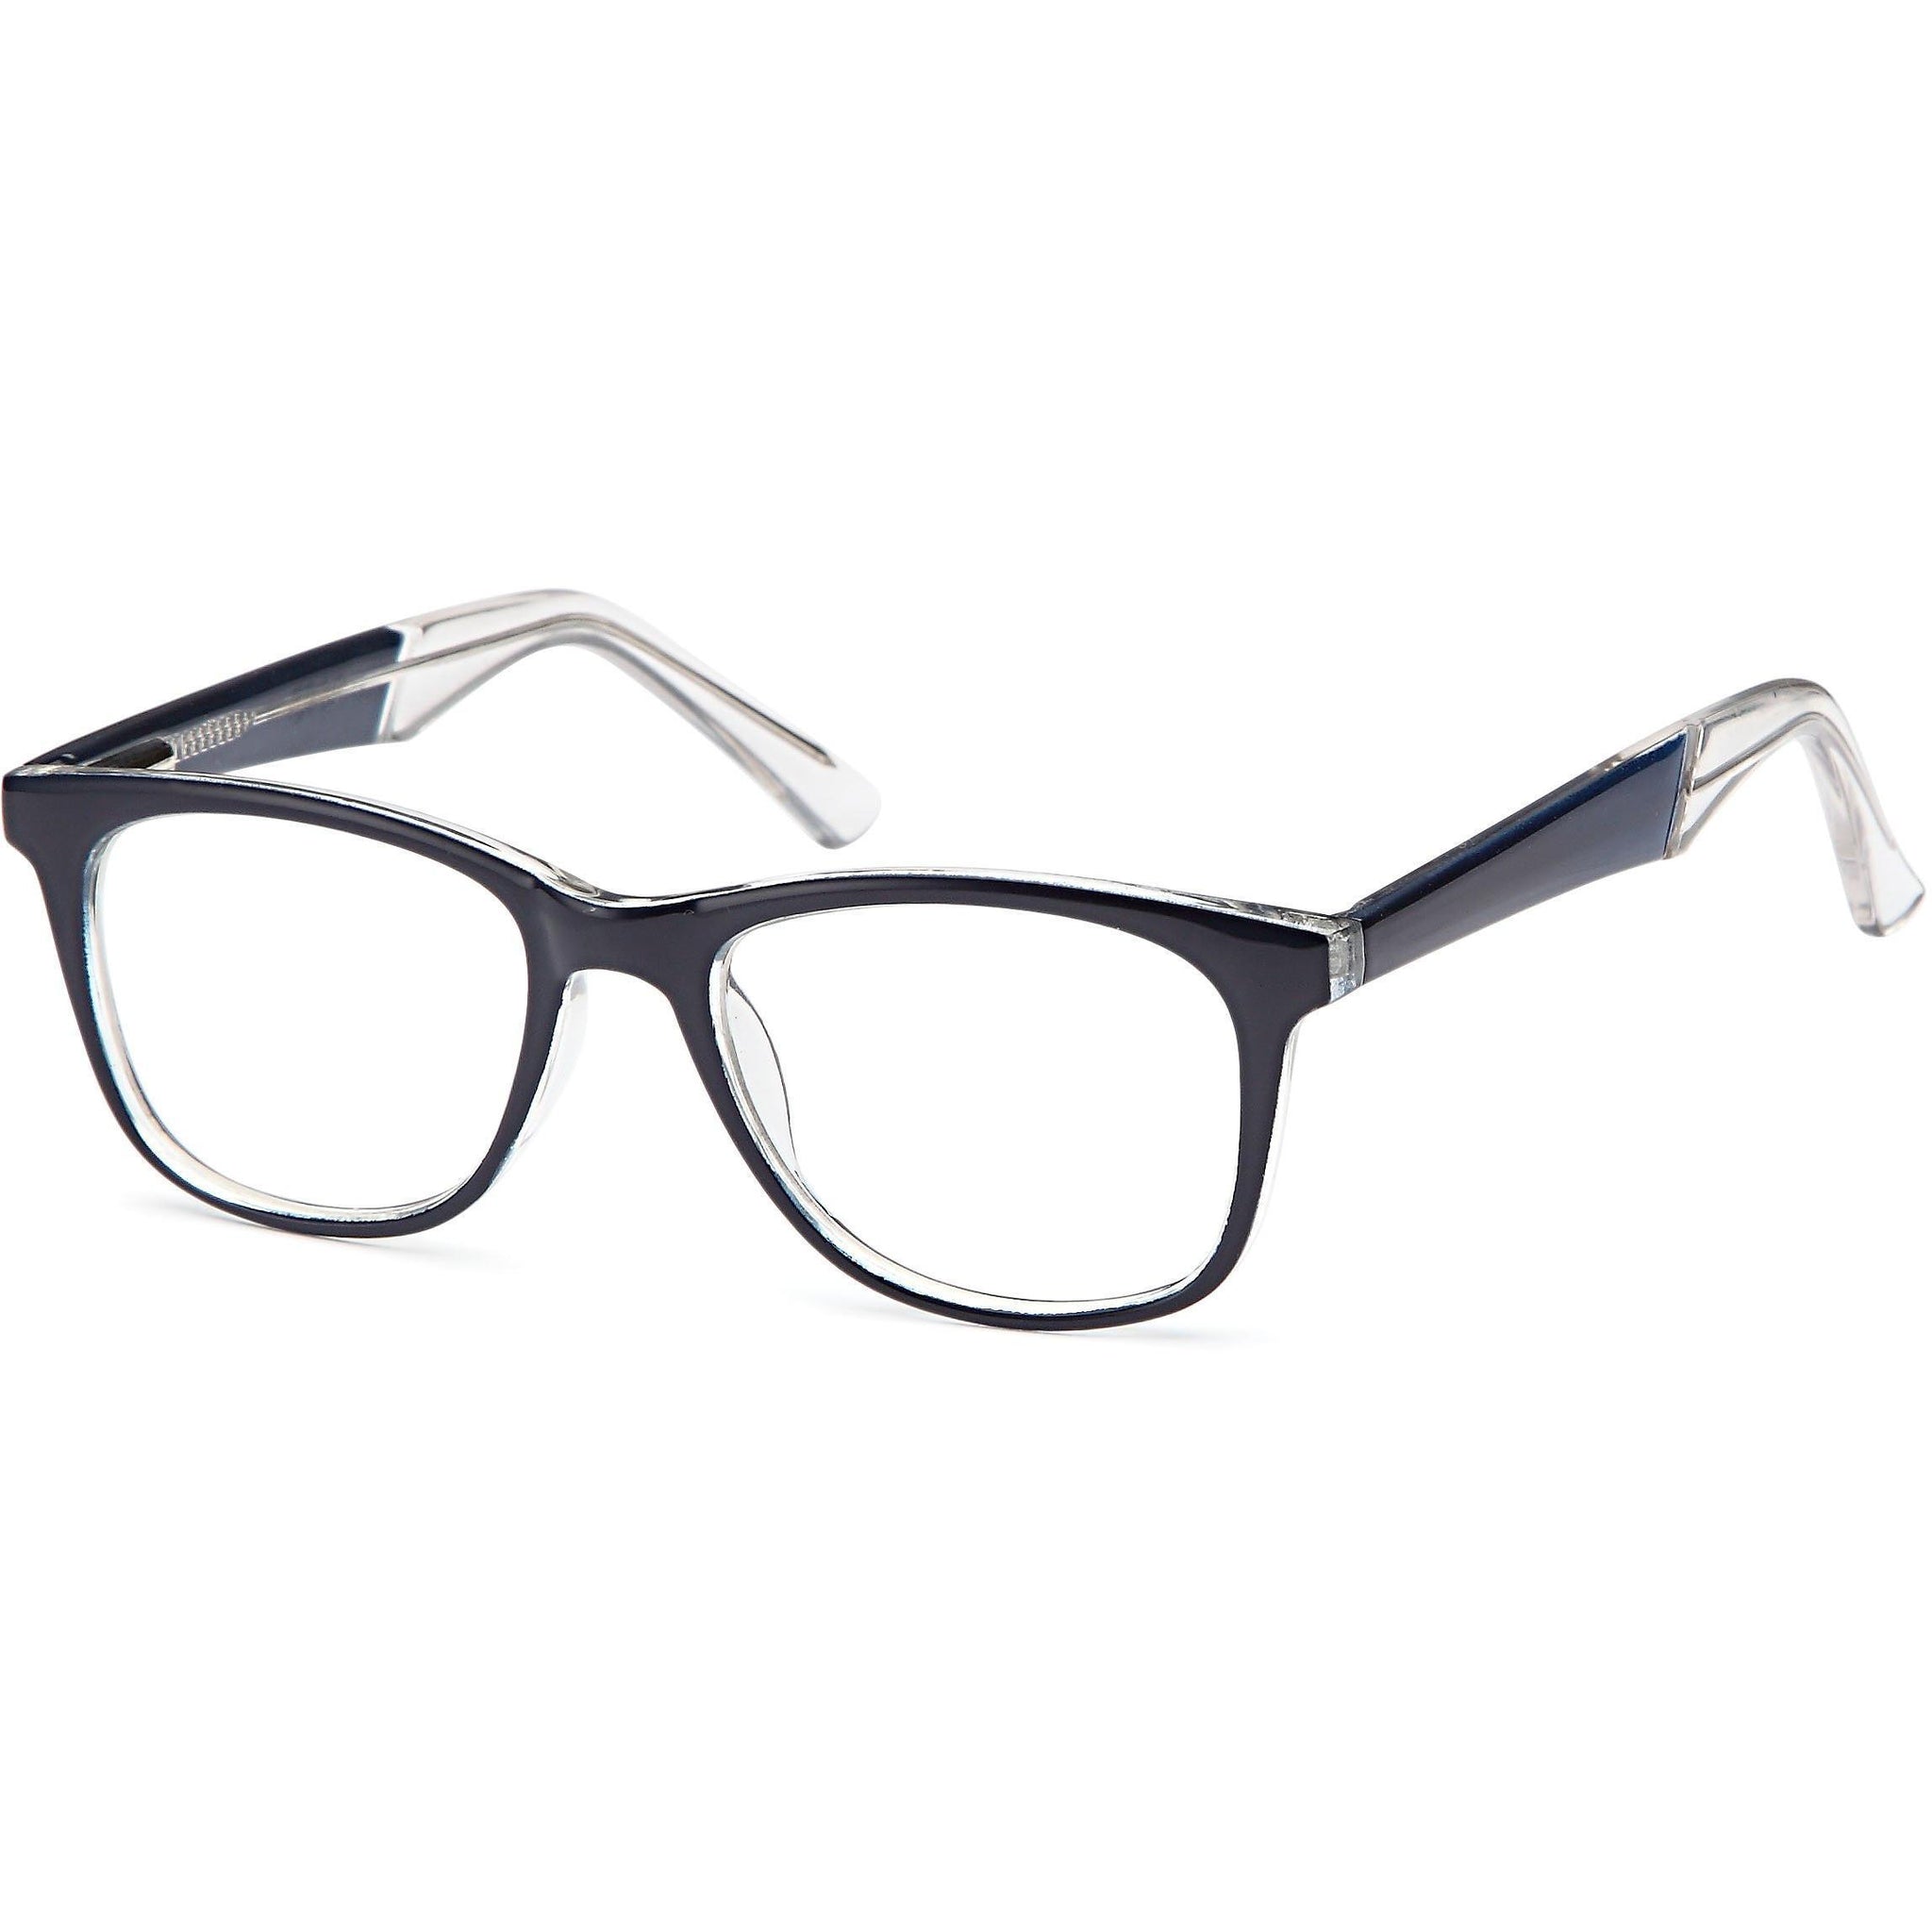 Albie by The Square Mile Juniors Eyeglasses Prescriptions Available - timetoshade